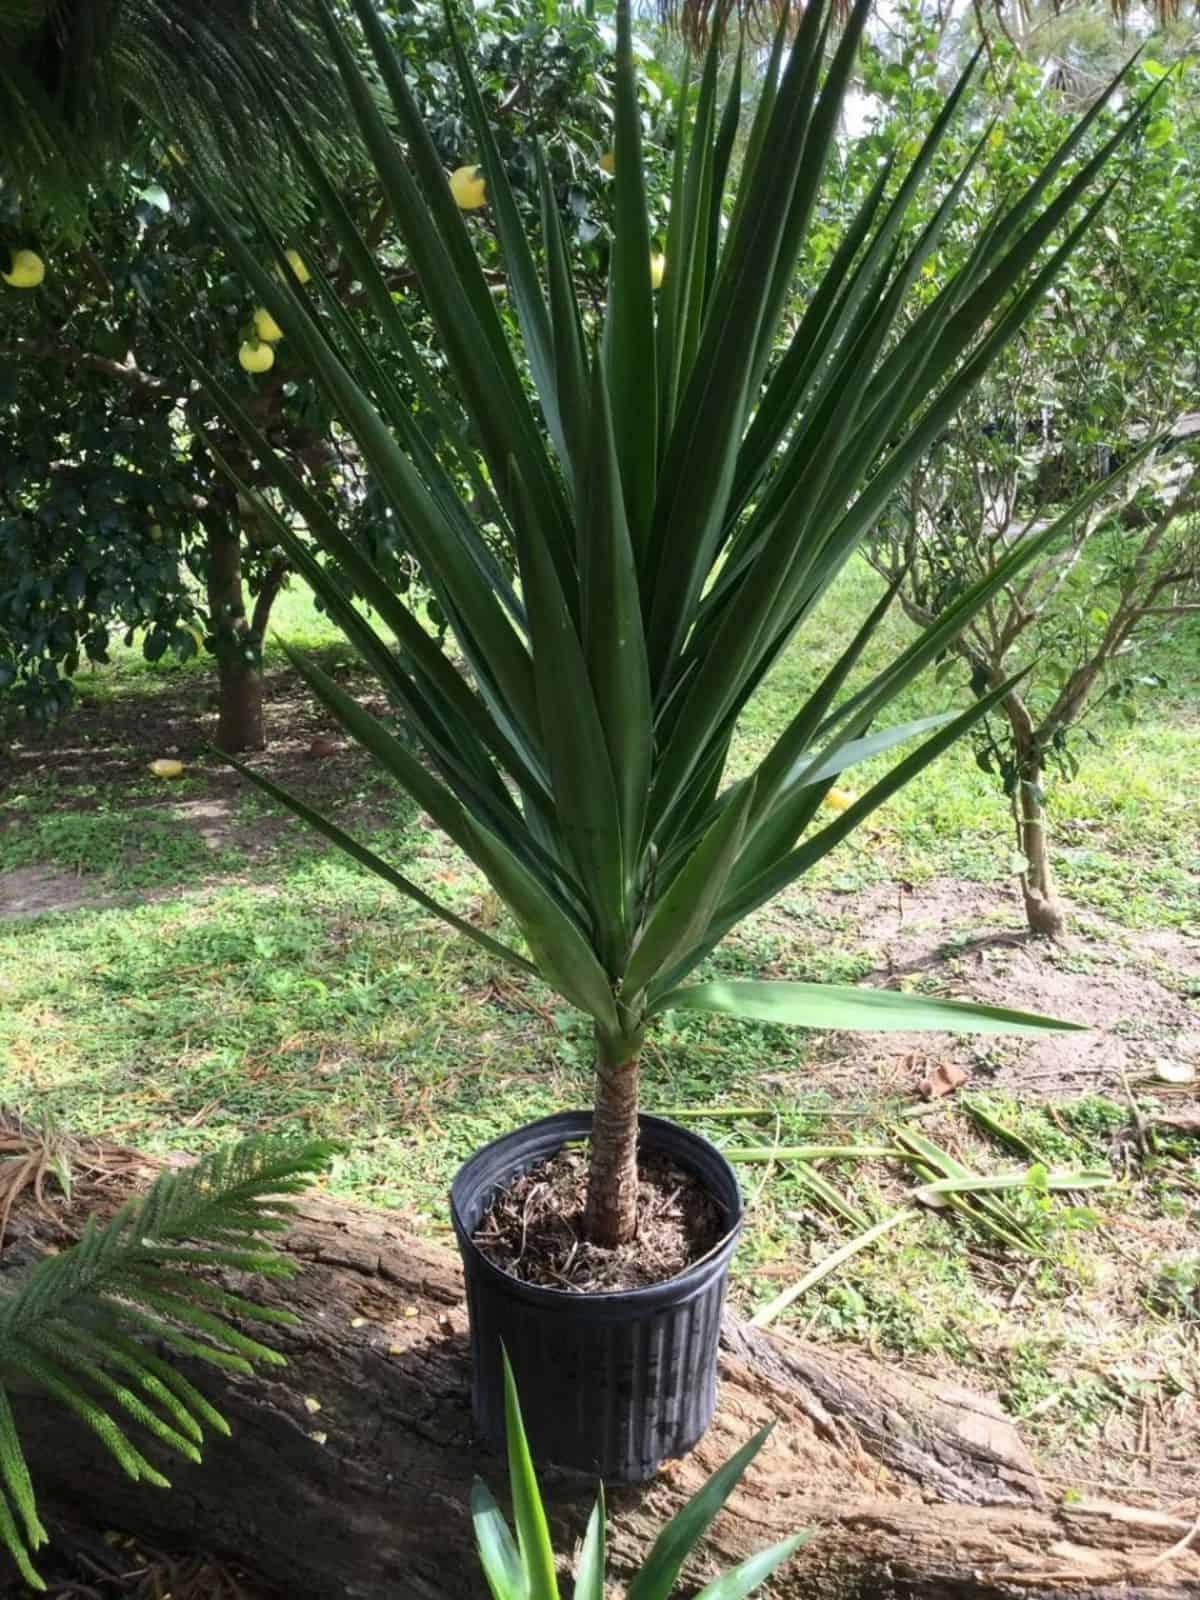 Yucca Elephantipes grows in a pot outdoor.